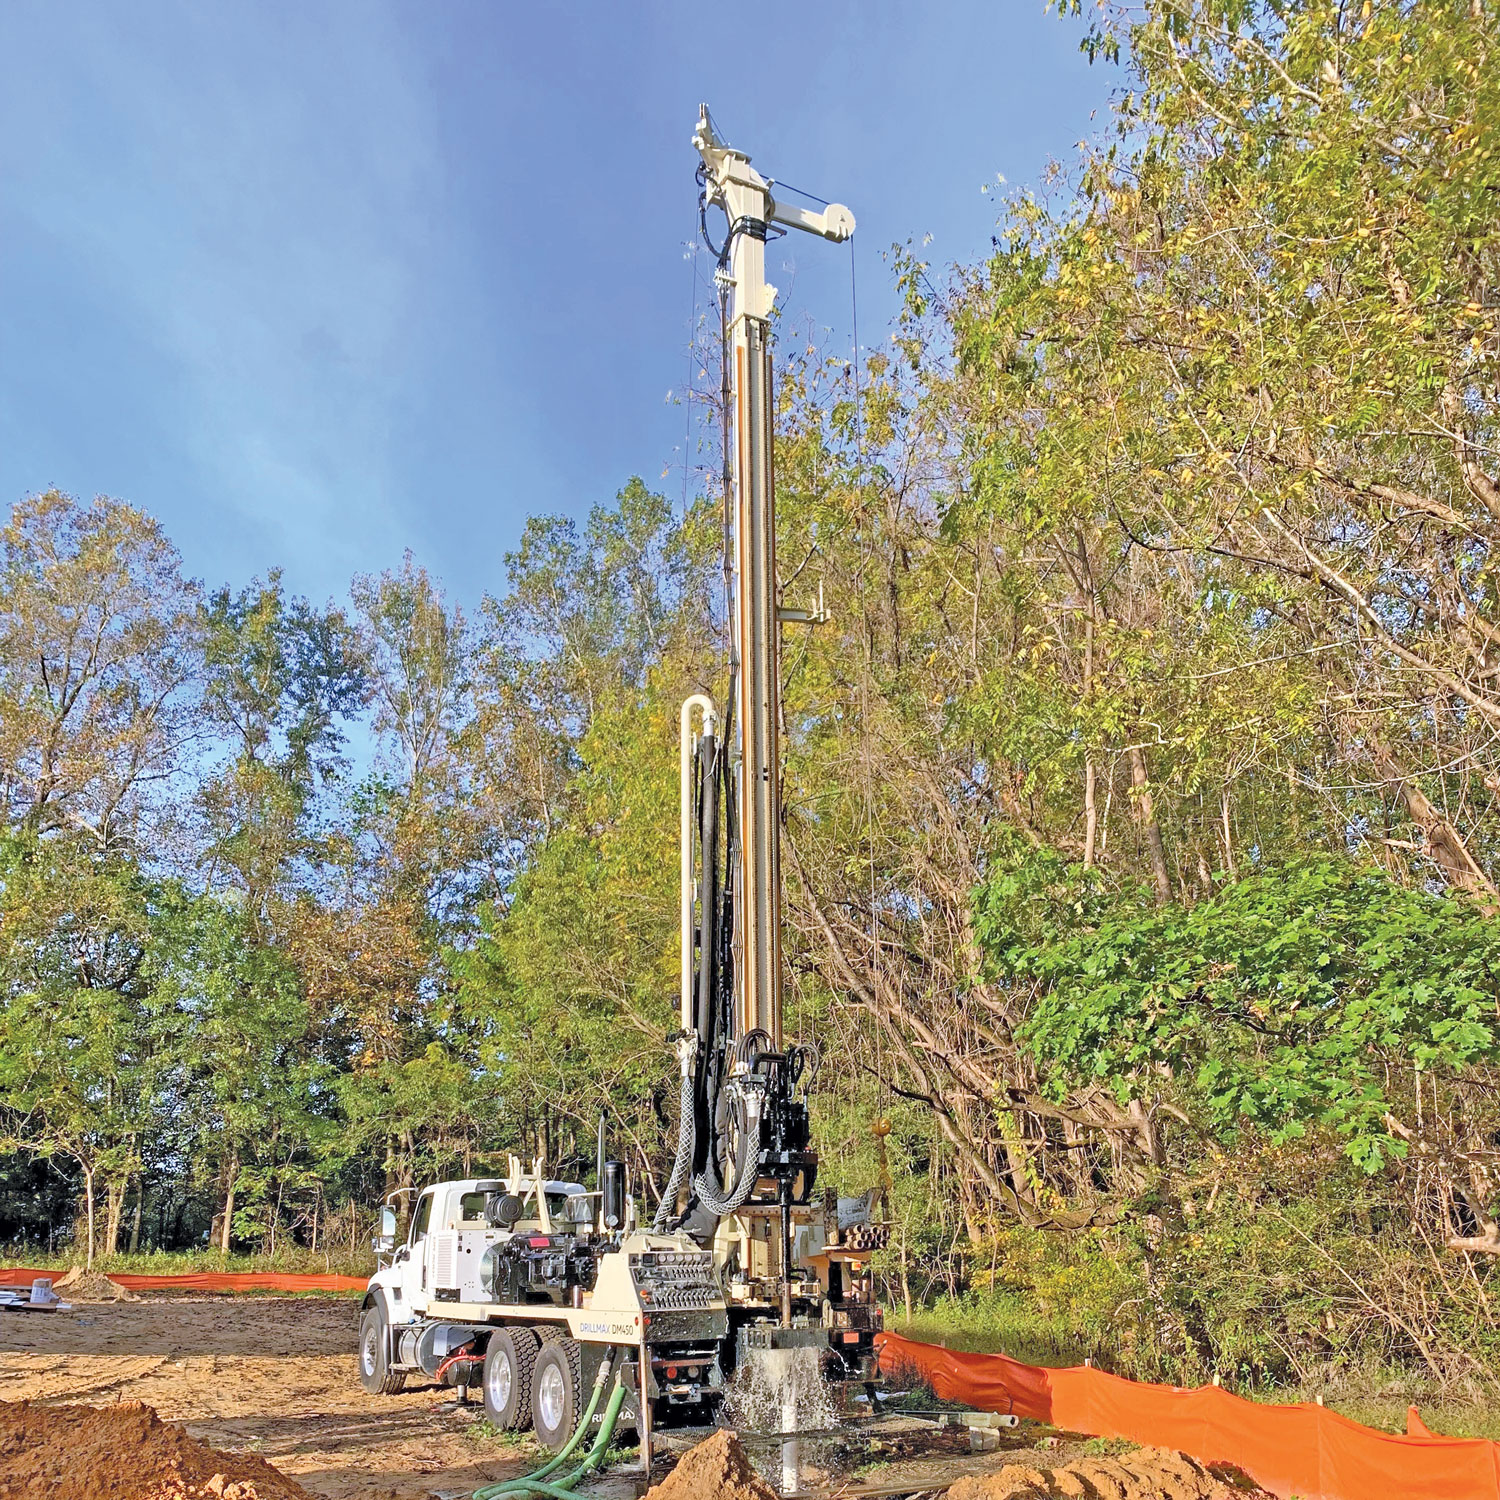 Efficiency, safety, and ease of the 2021 DM450 facilitates completing water well construction jobs quickly and training drillers easily.